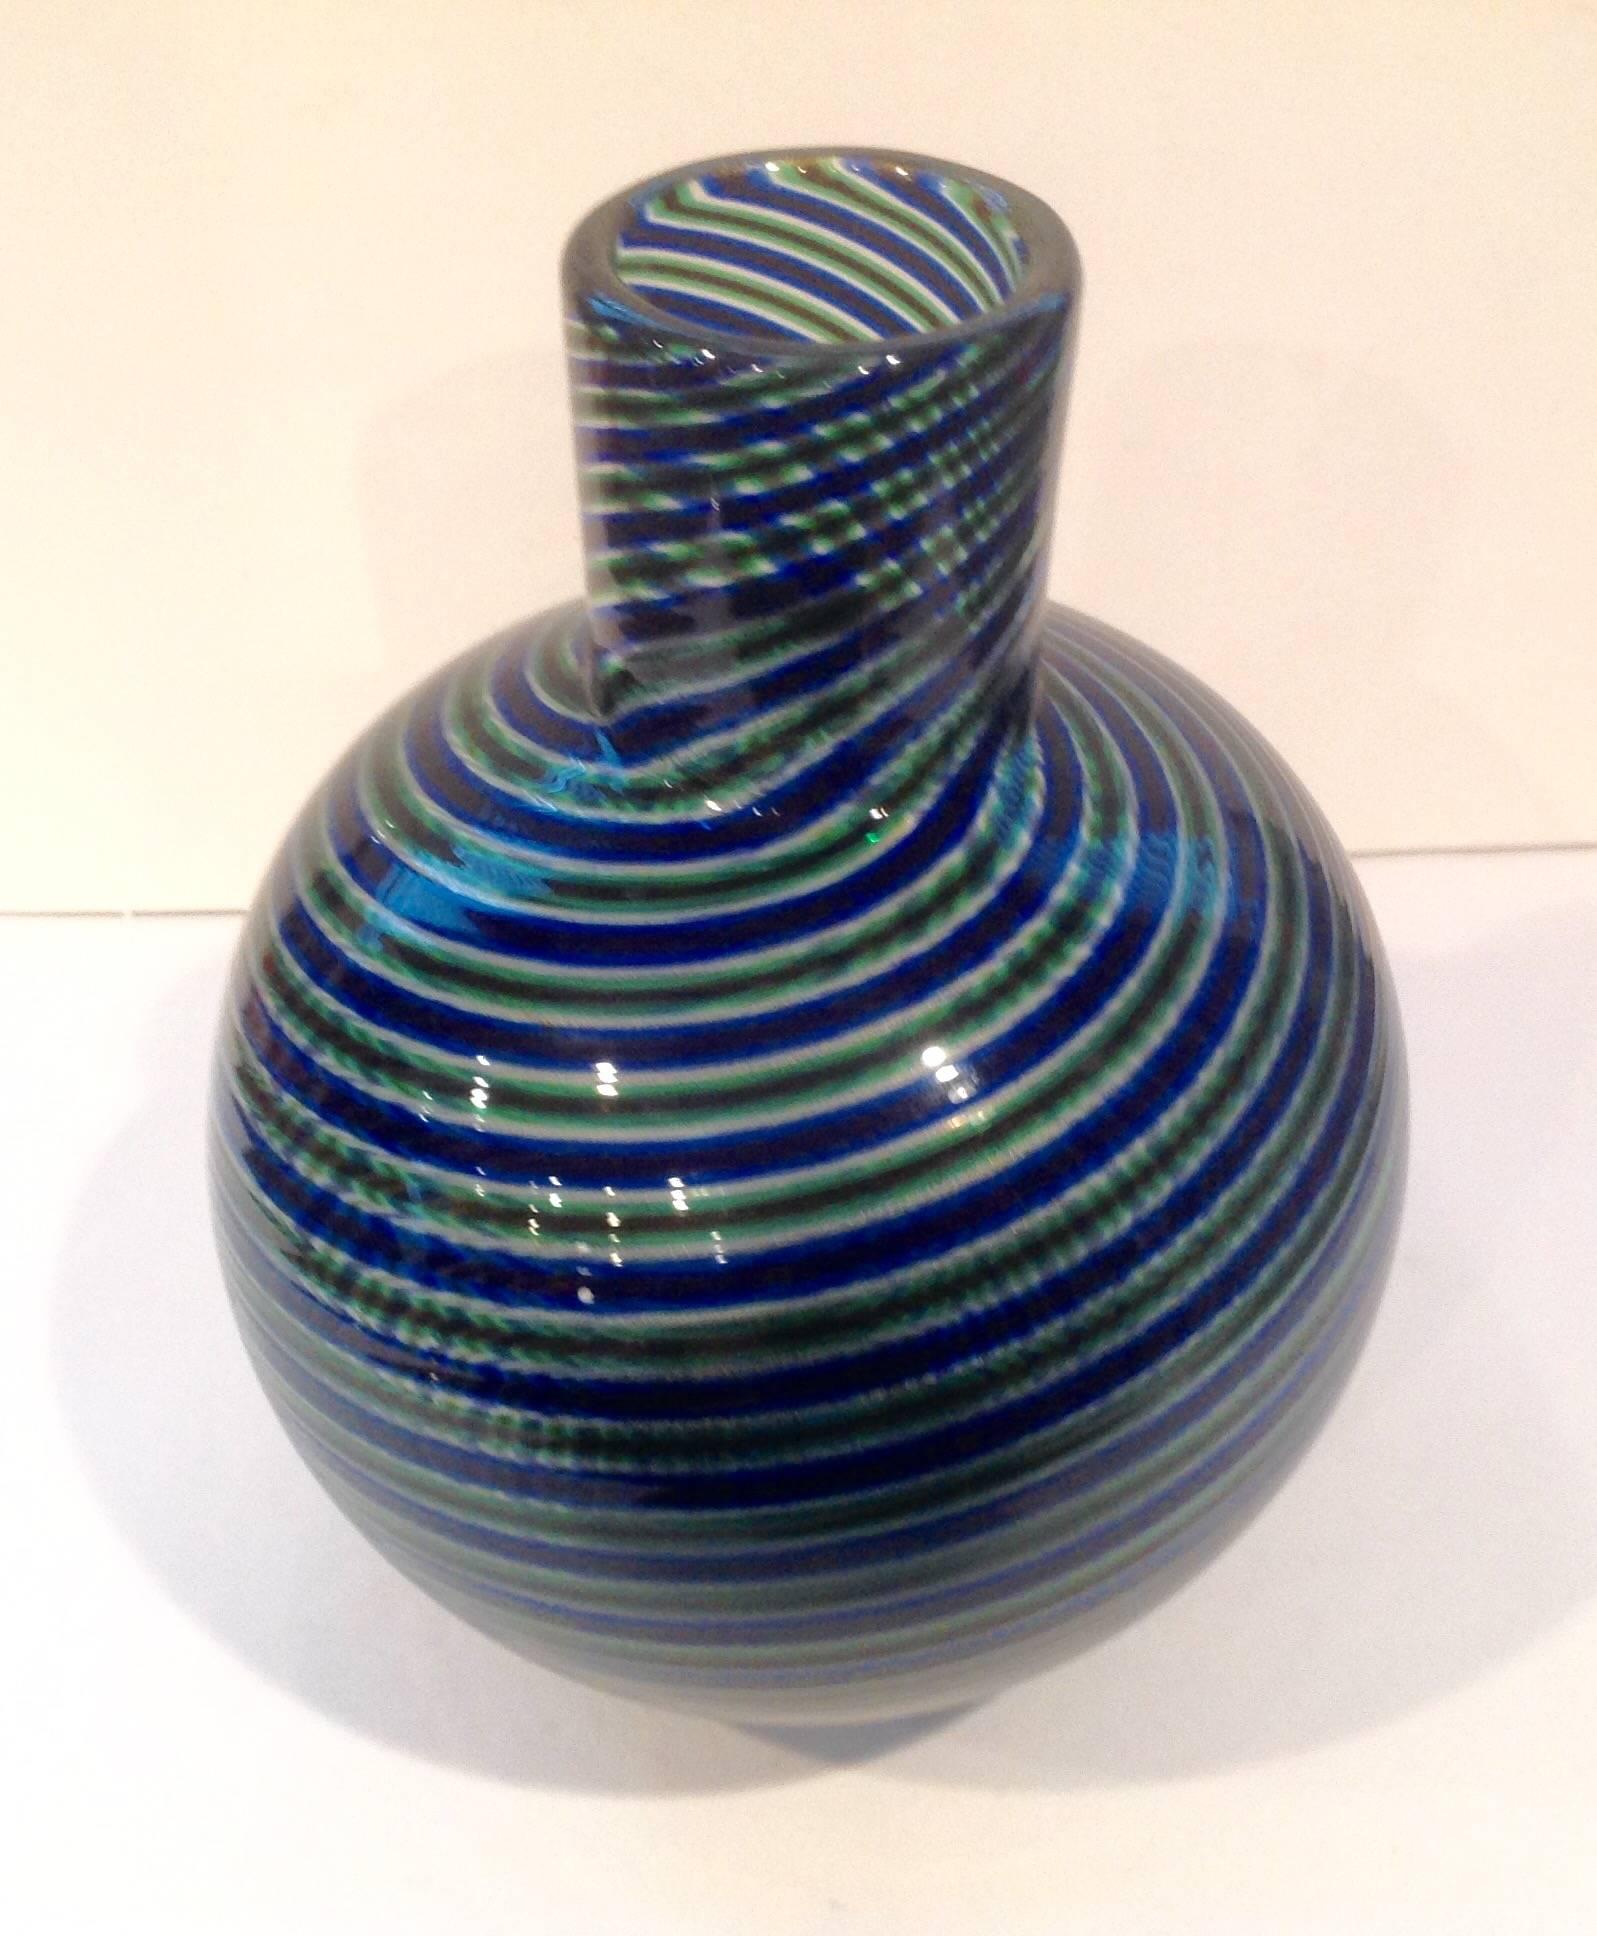 Alternating striped glass vase with gold highlights by Barovier and Toso. Signed on base.